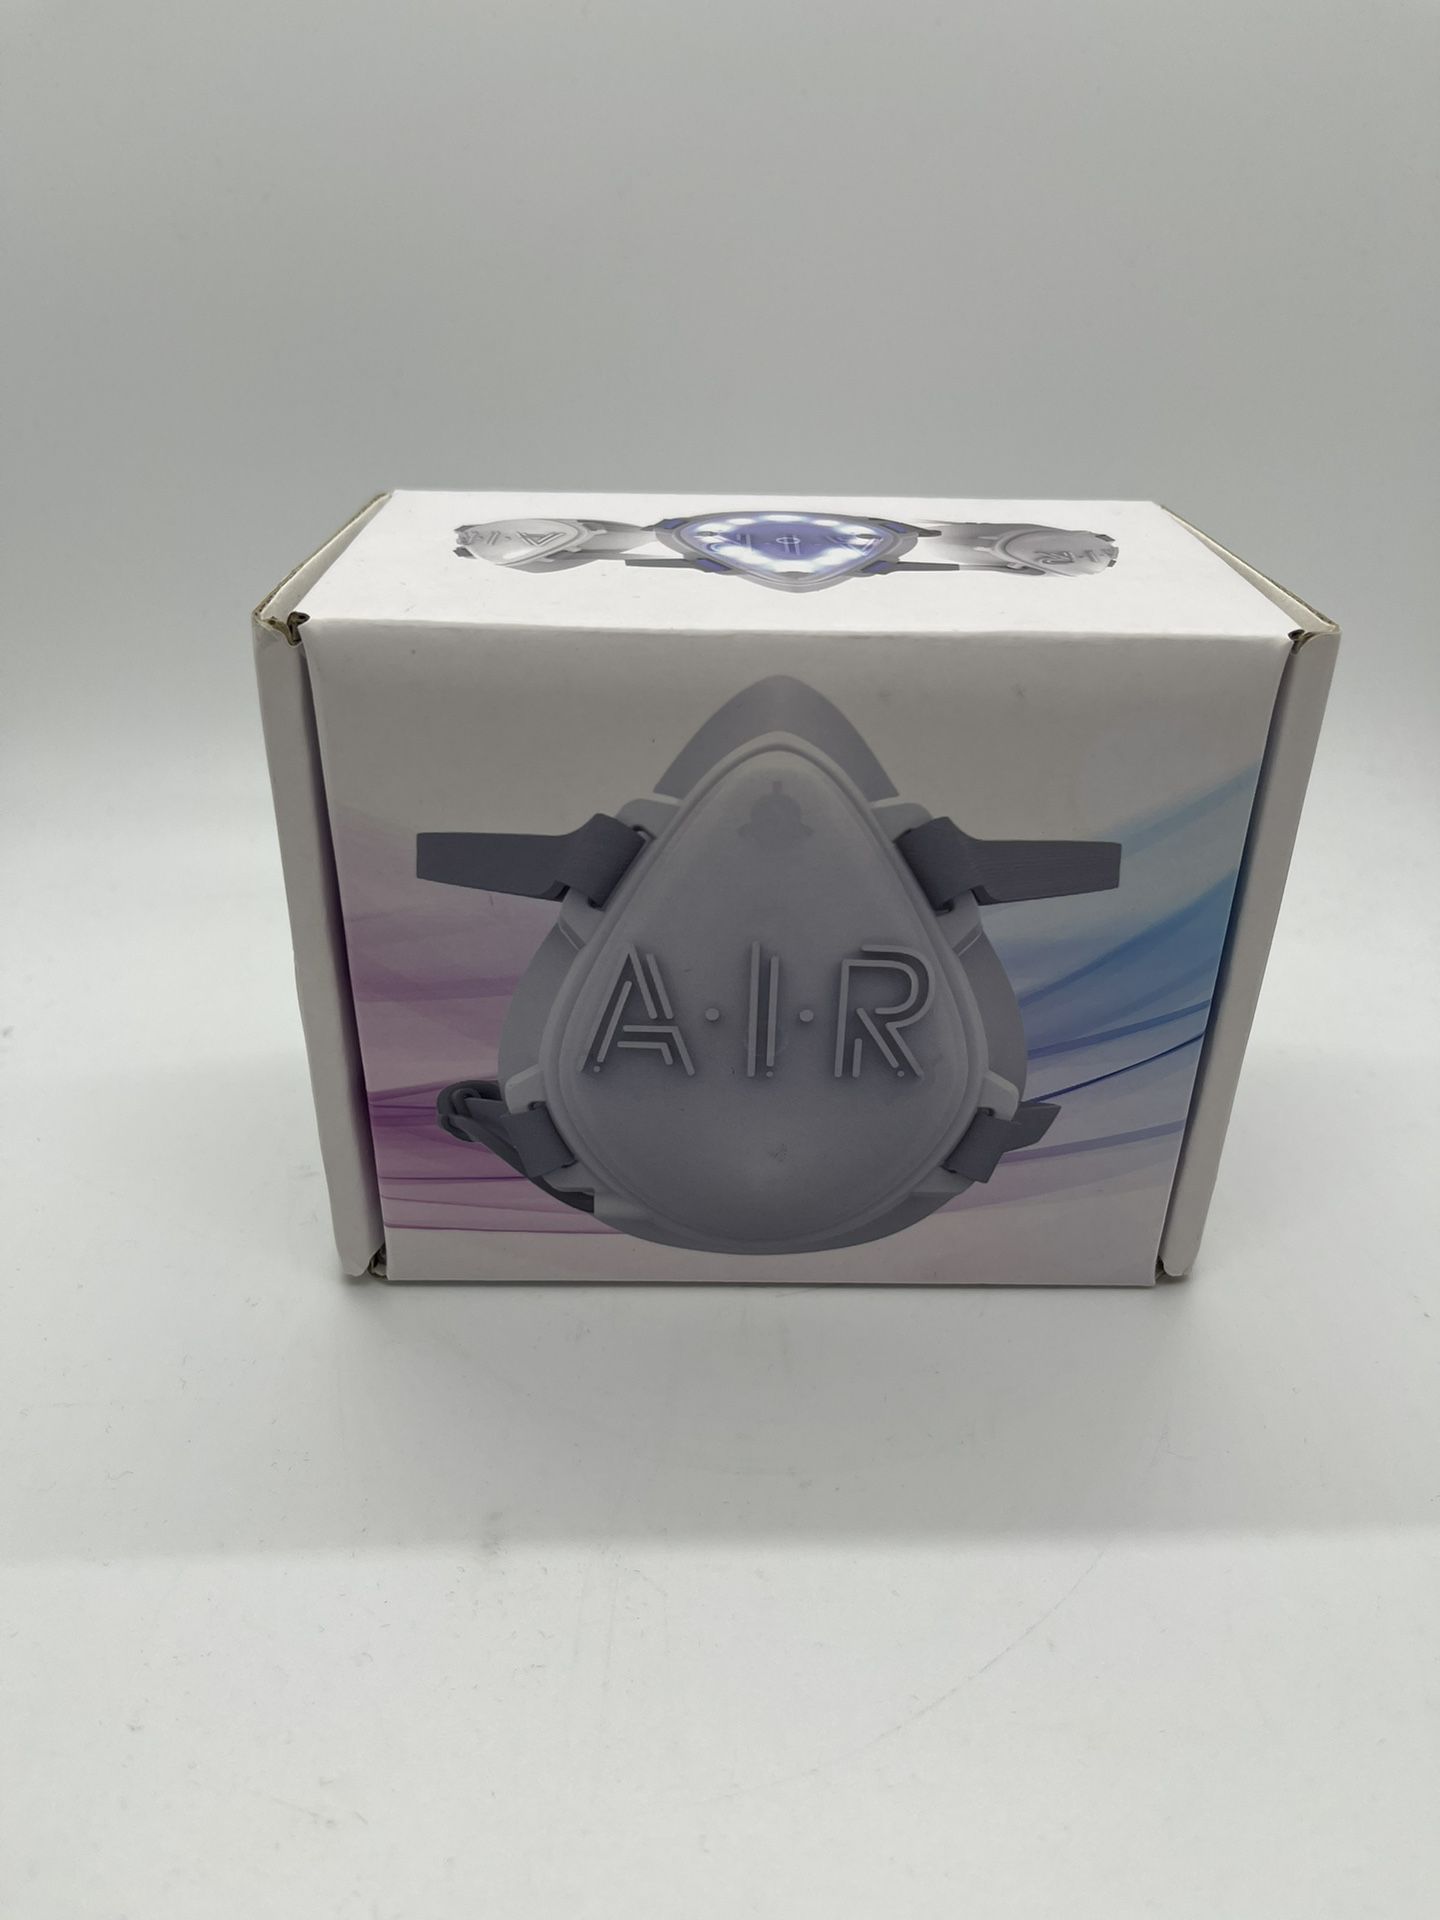 Oracle AIR Solo - Personal UV Irradiation Face Mask Respirator